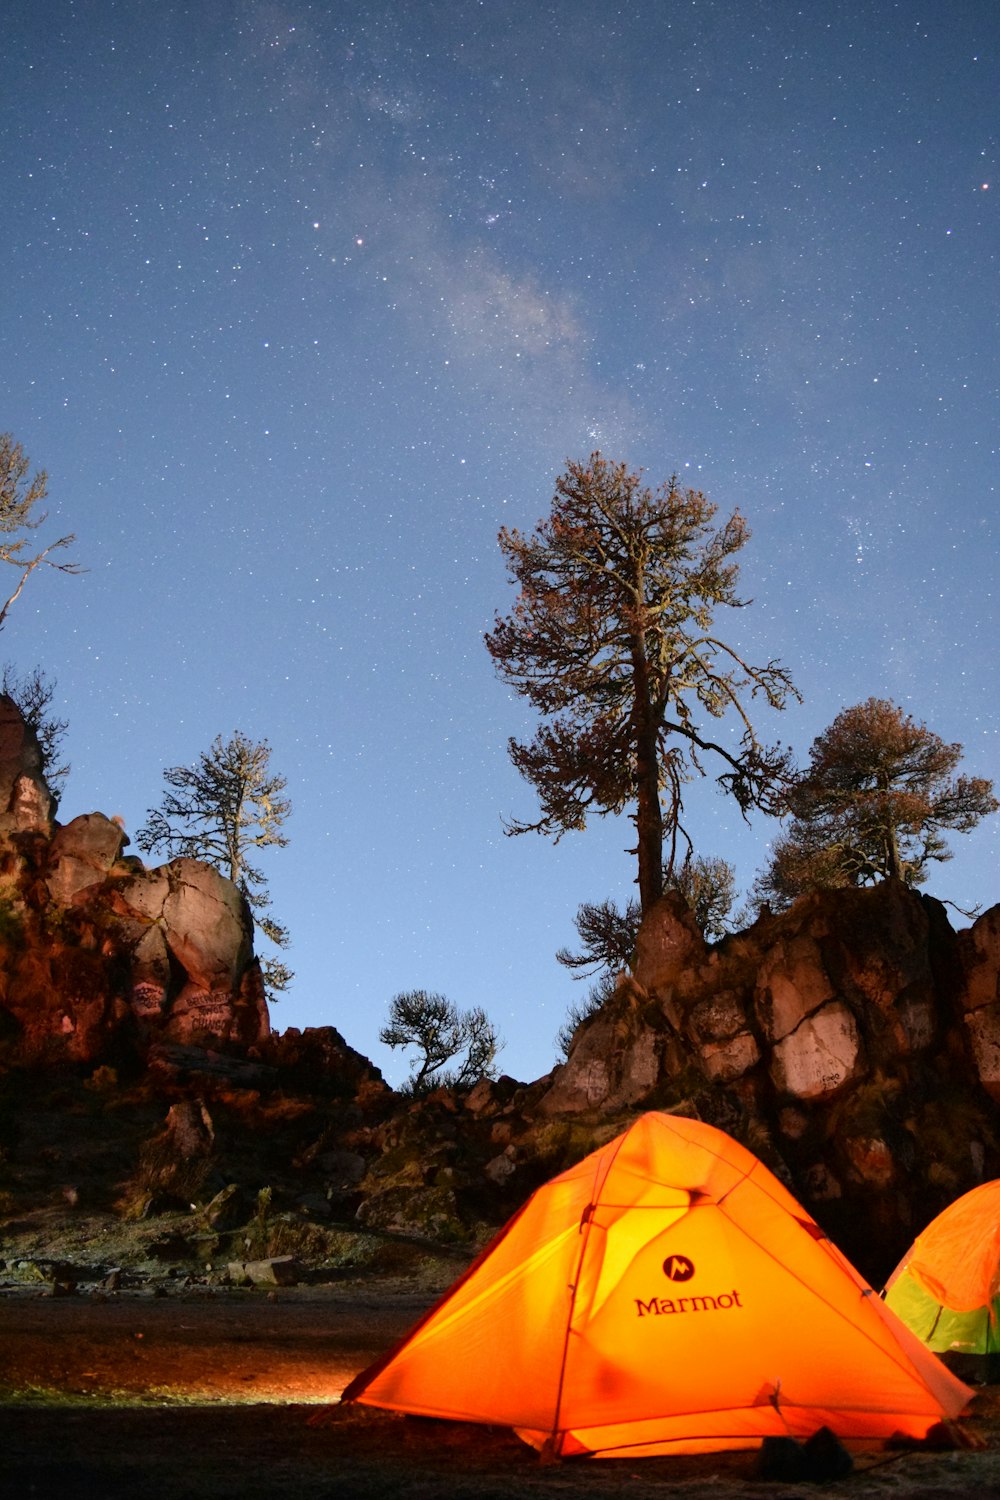 yellow tent on brown rock formation under blue sky during night time